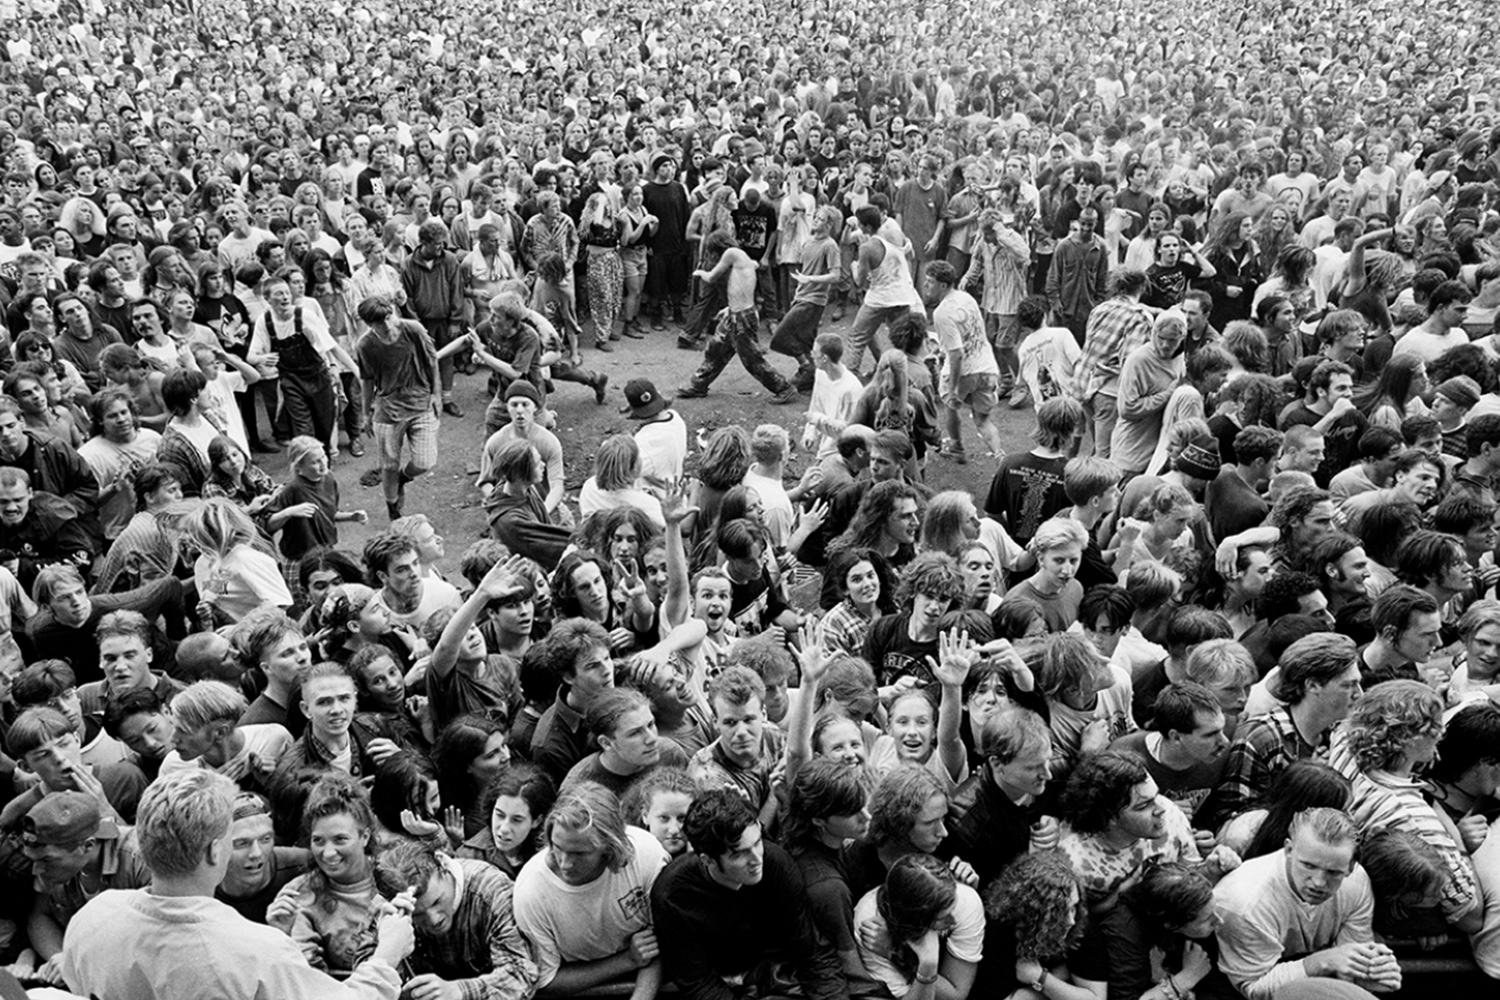 Headbanger 101: Mosh Pit Etiquette and How to Make It out Alive